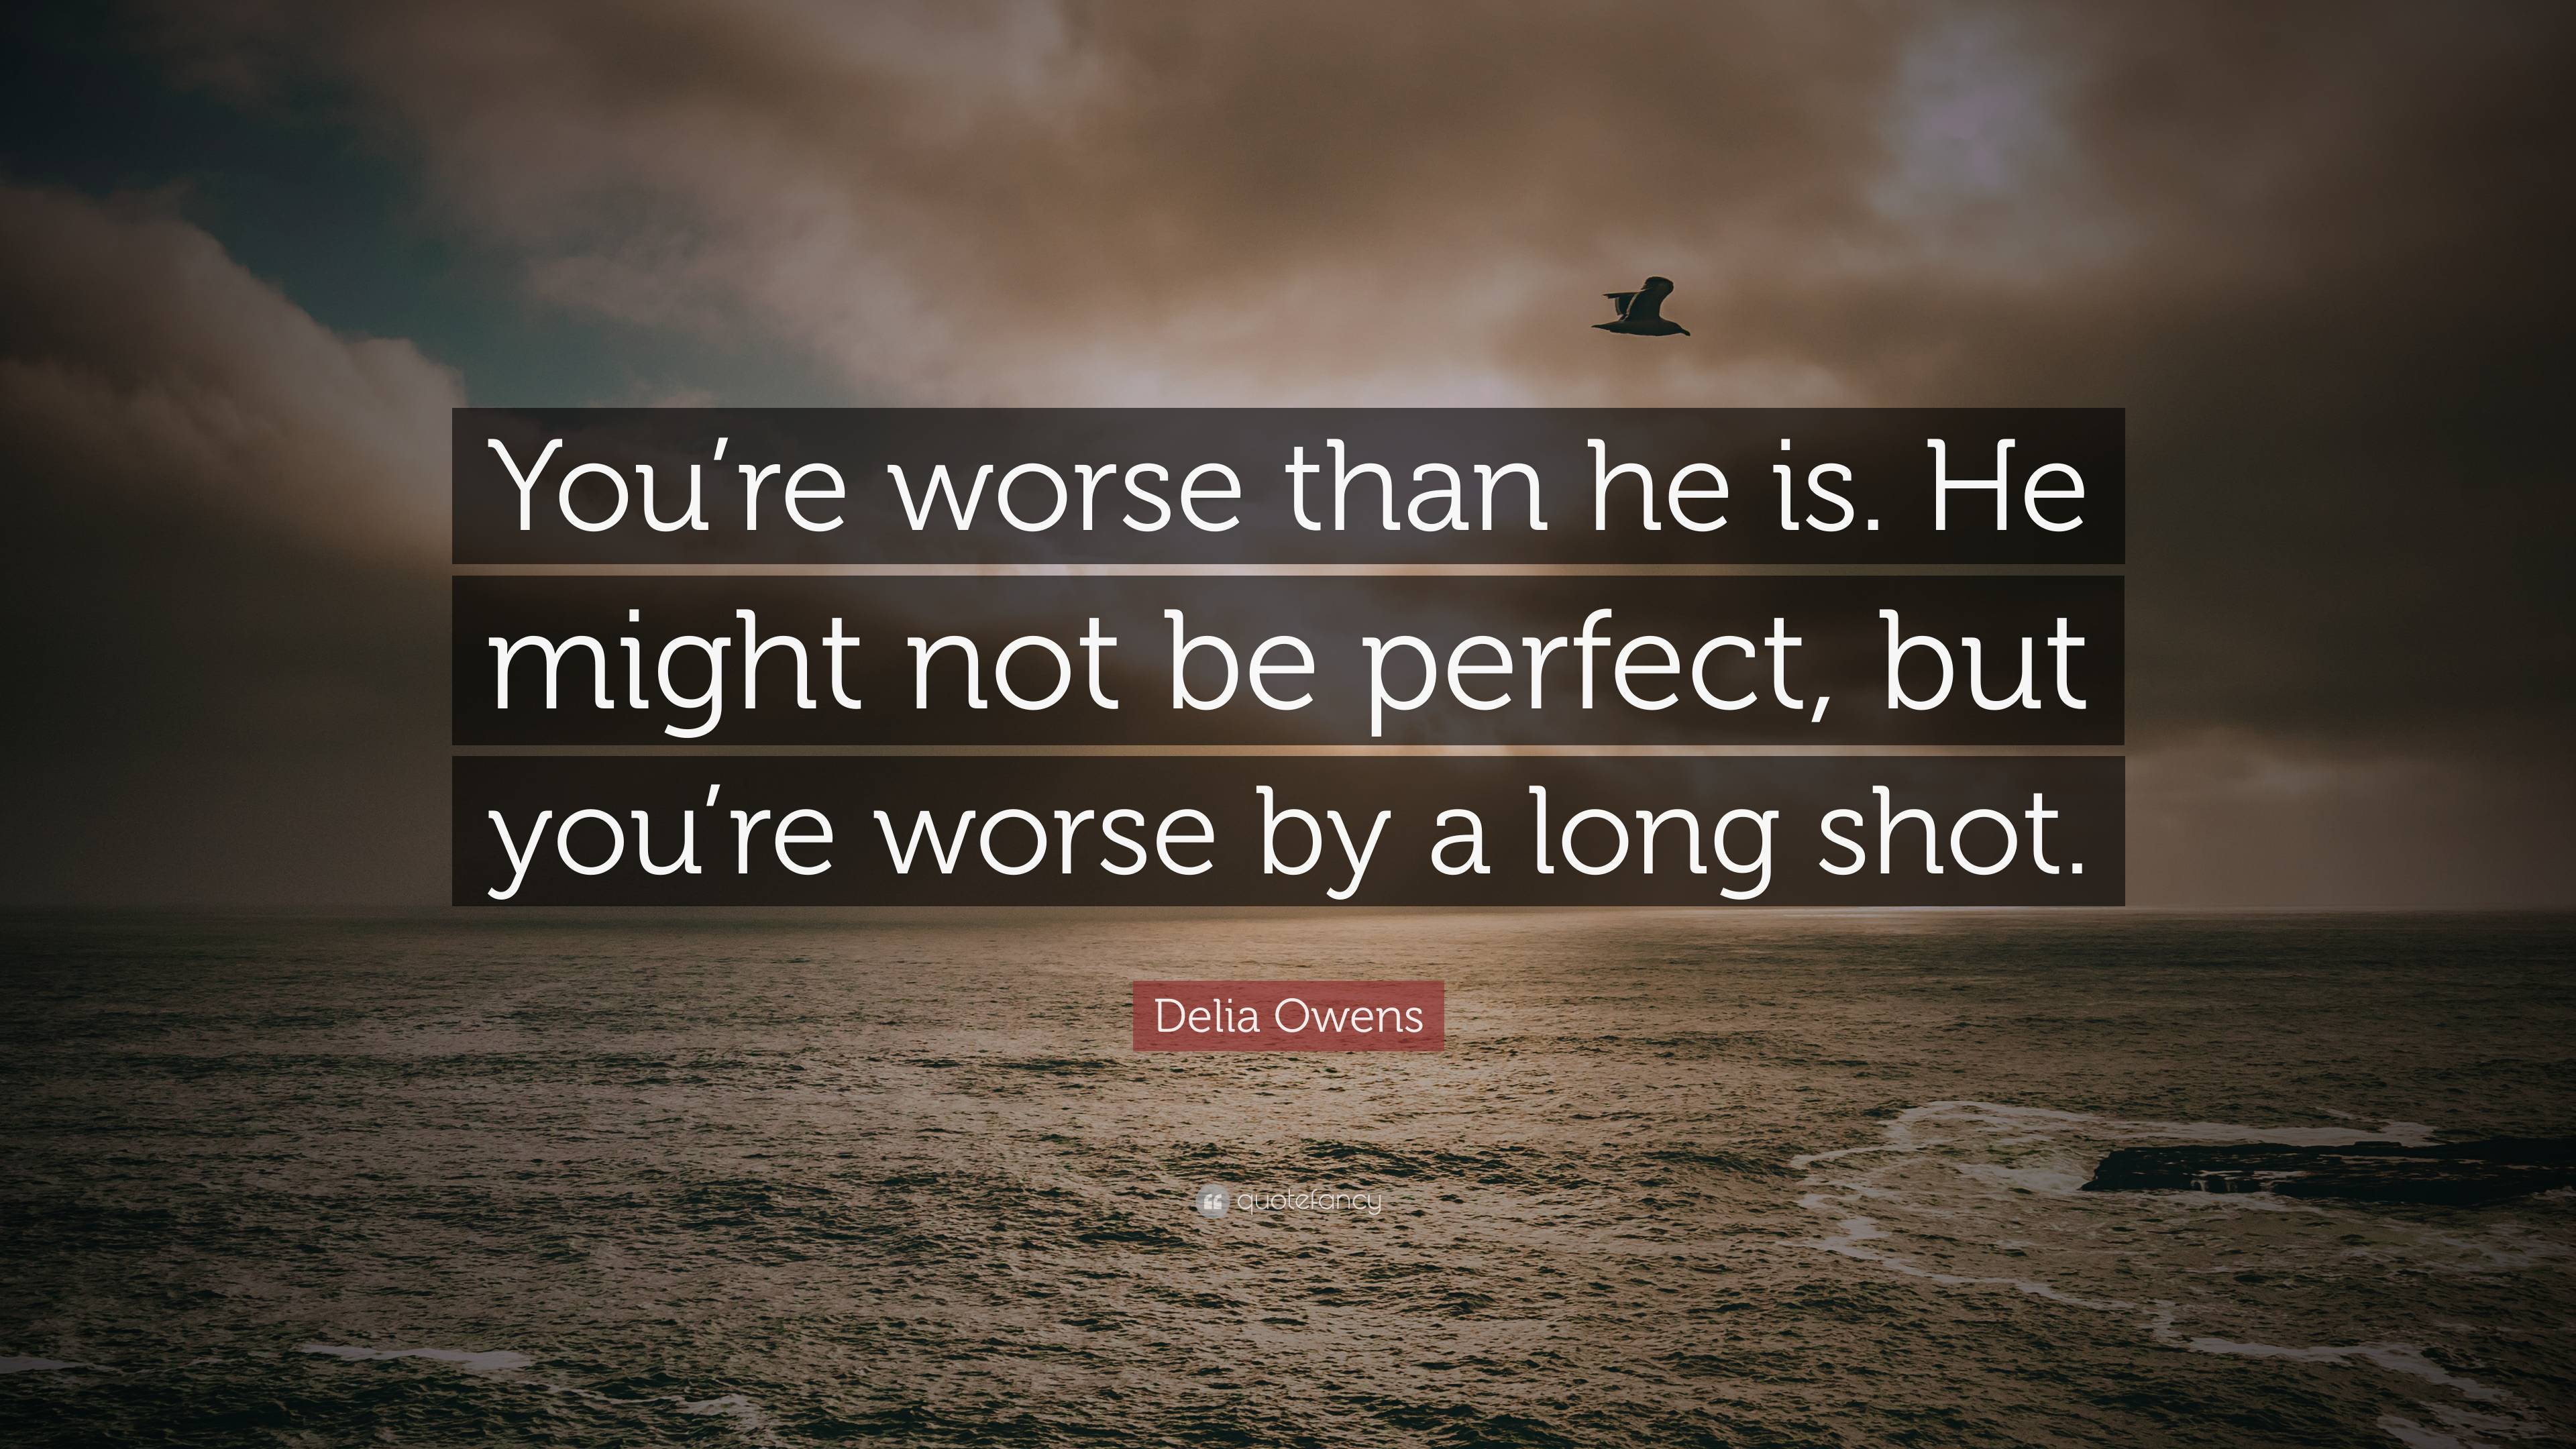 Delia Owens Quote: “You’re worse than he is. He might not be perfect ...